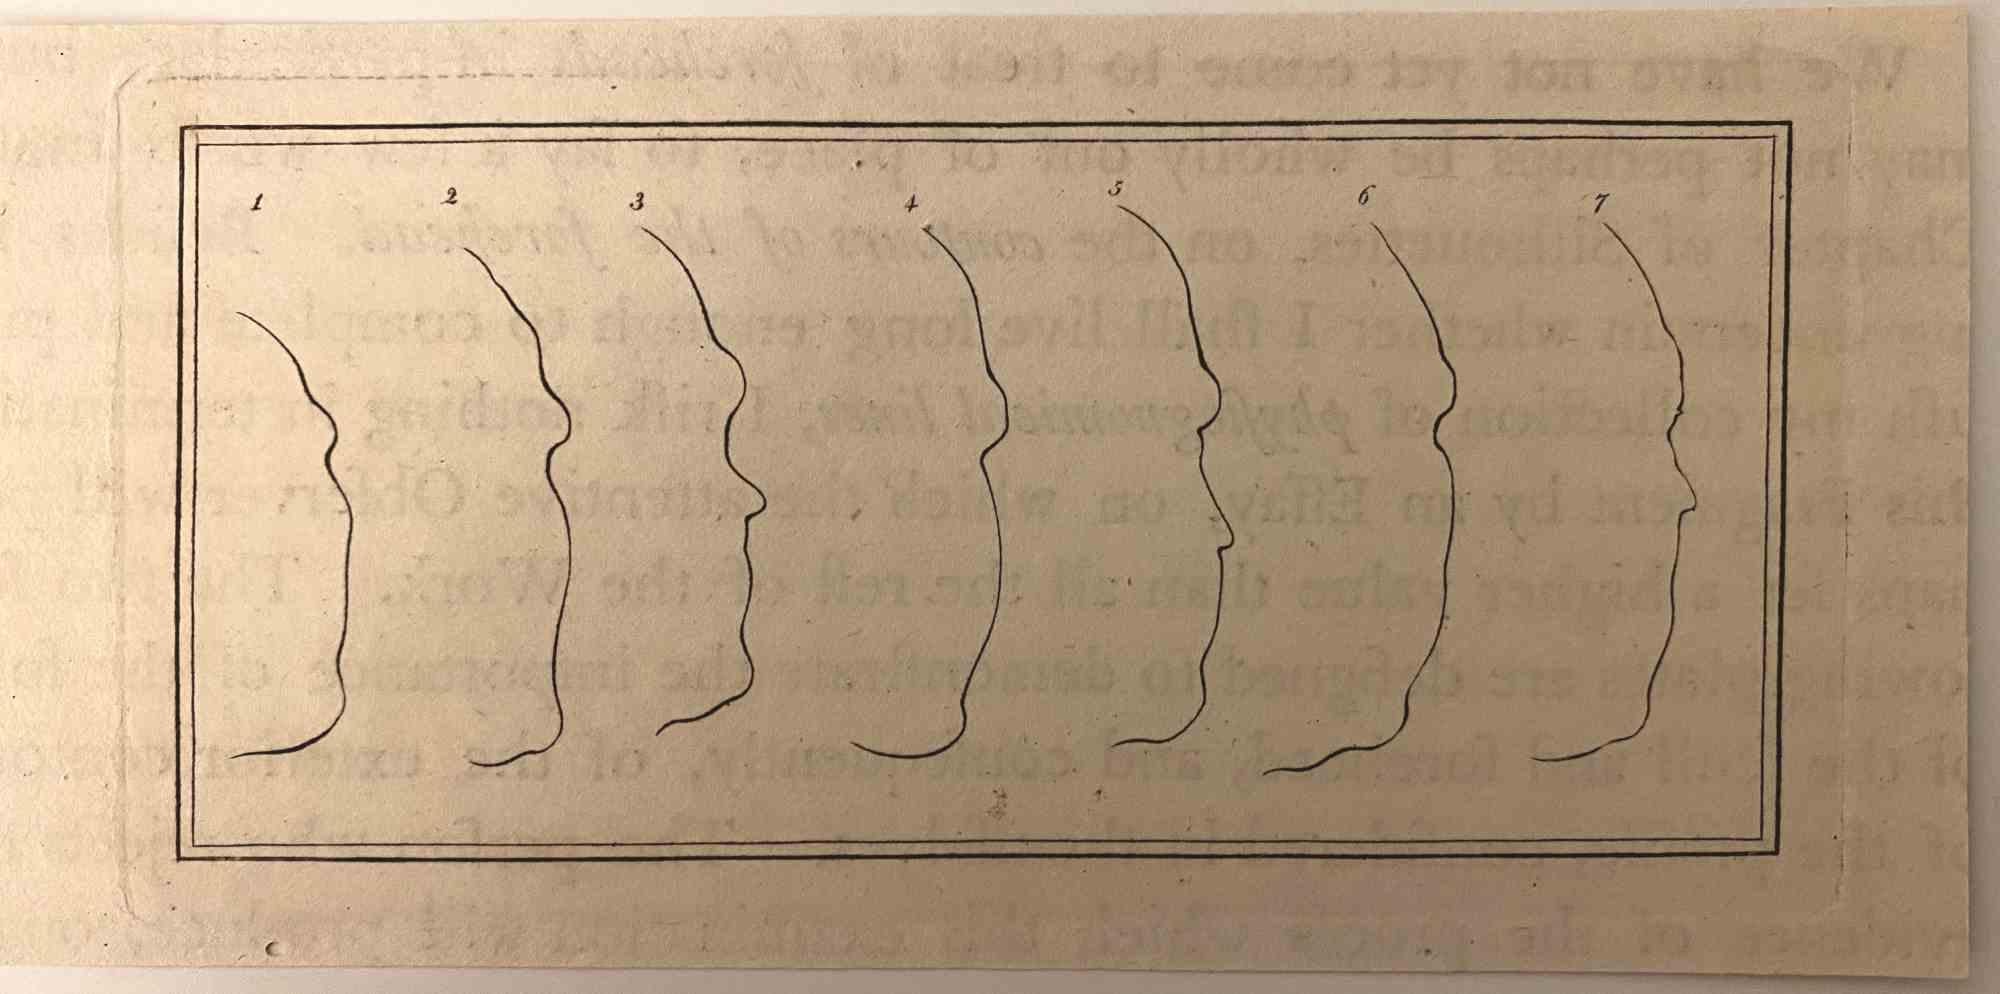 Profiles is an original etching artwork realized by Thomas Holloway for Johann Caspar Lavater's "Essays on Physiognomy, Designed to Promote the Knowledge and the Love of Mankind", London, Bensley, 1810. 

With the script on the rear.

Good